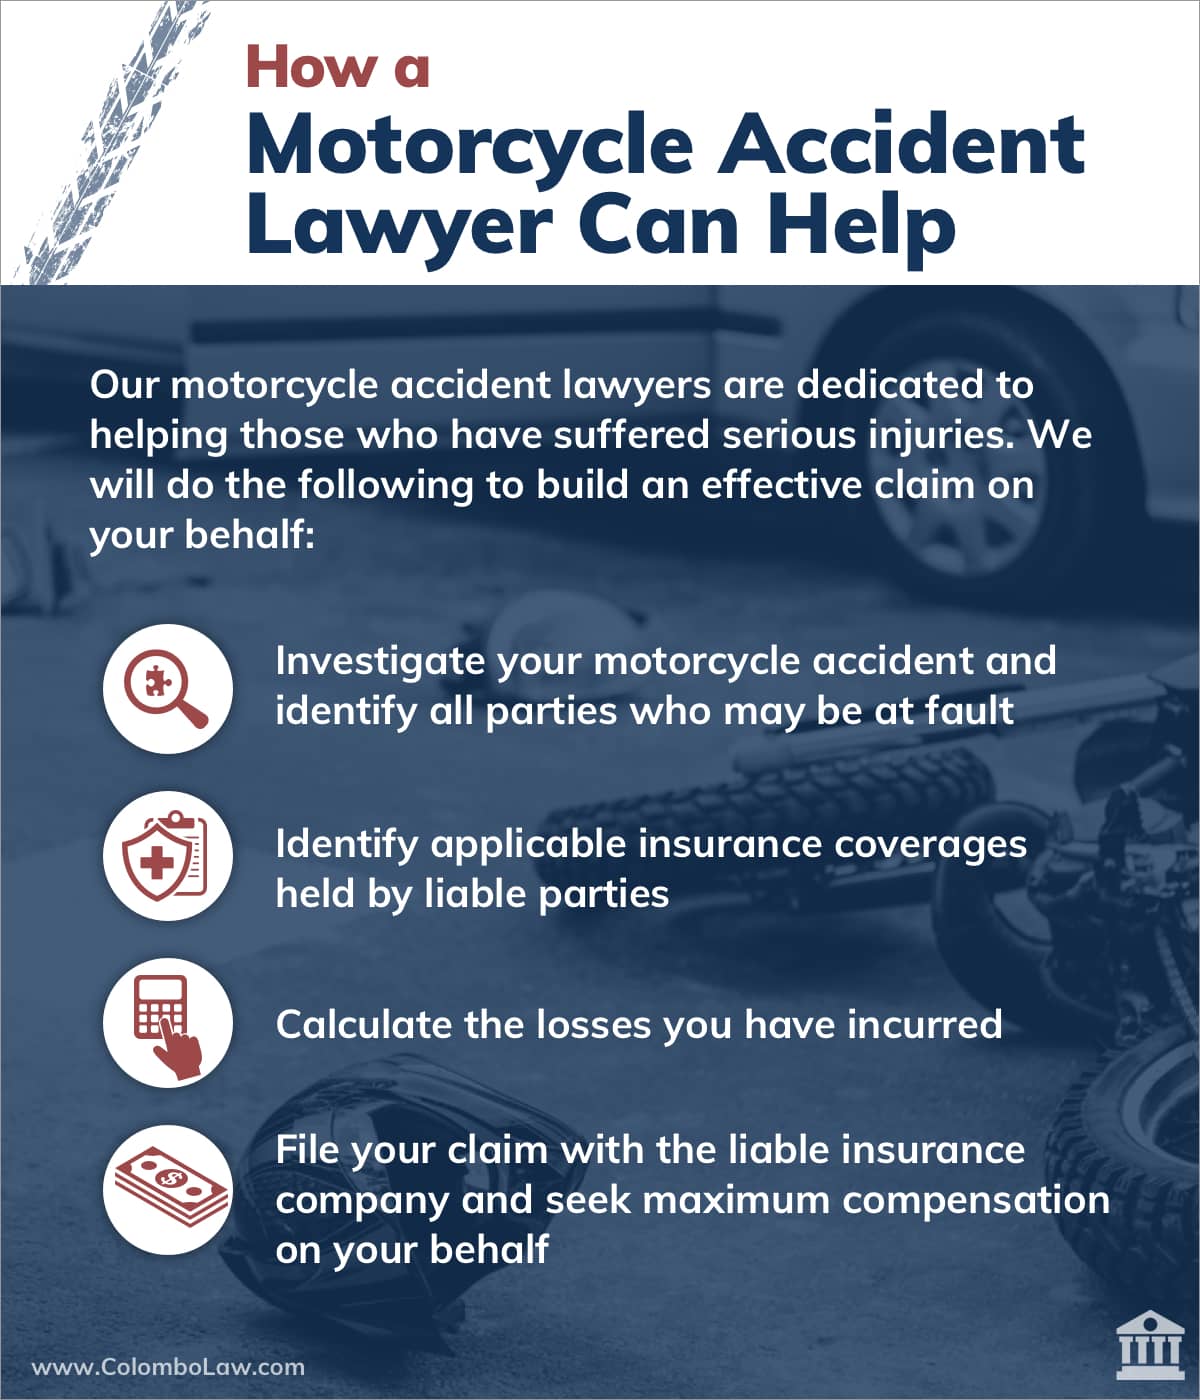 How a Motorcycle Accident Lawyer Can Help